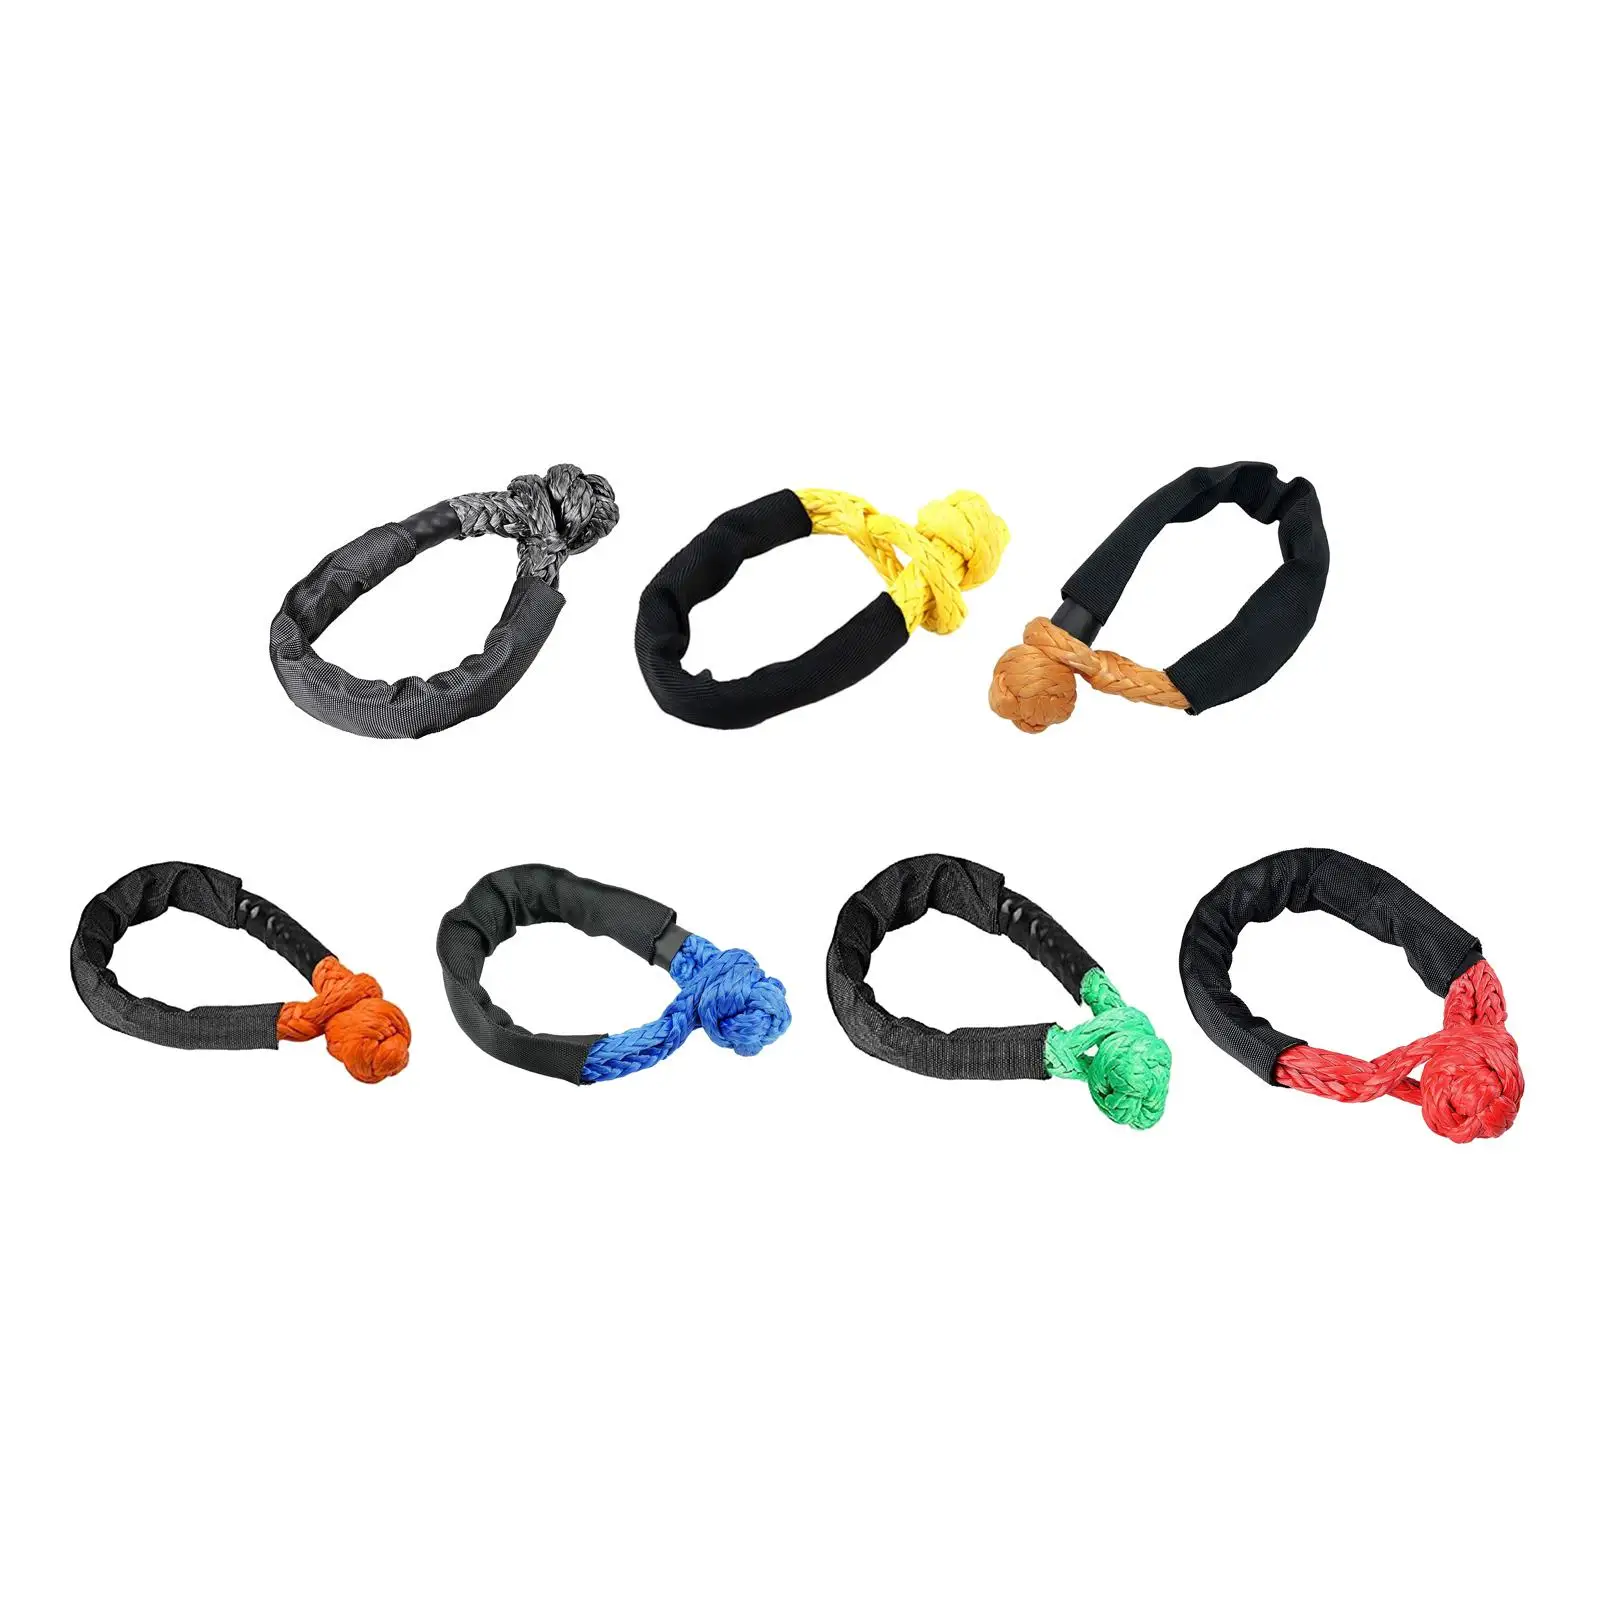 Car Tow Rope Shackle w/Winch Snatch  Ring, Synthetic  Rope Truck Emergency Traction Rope w/Protective Sleeve, Breaking Strength